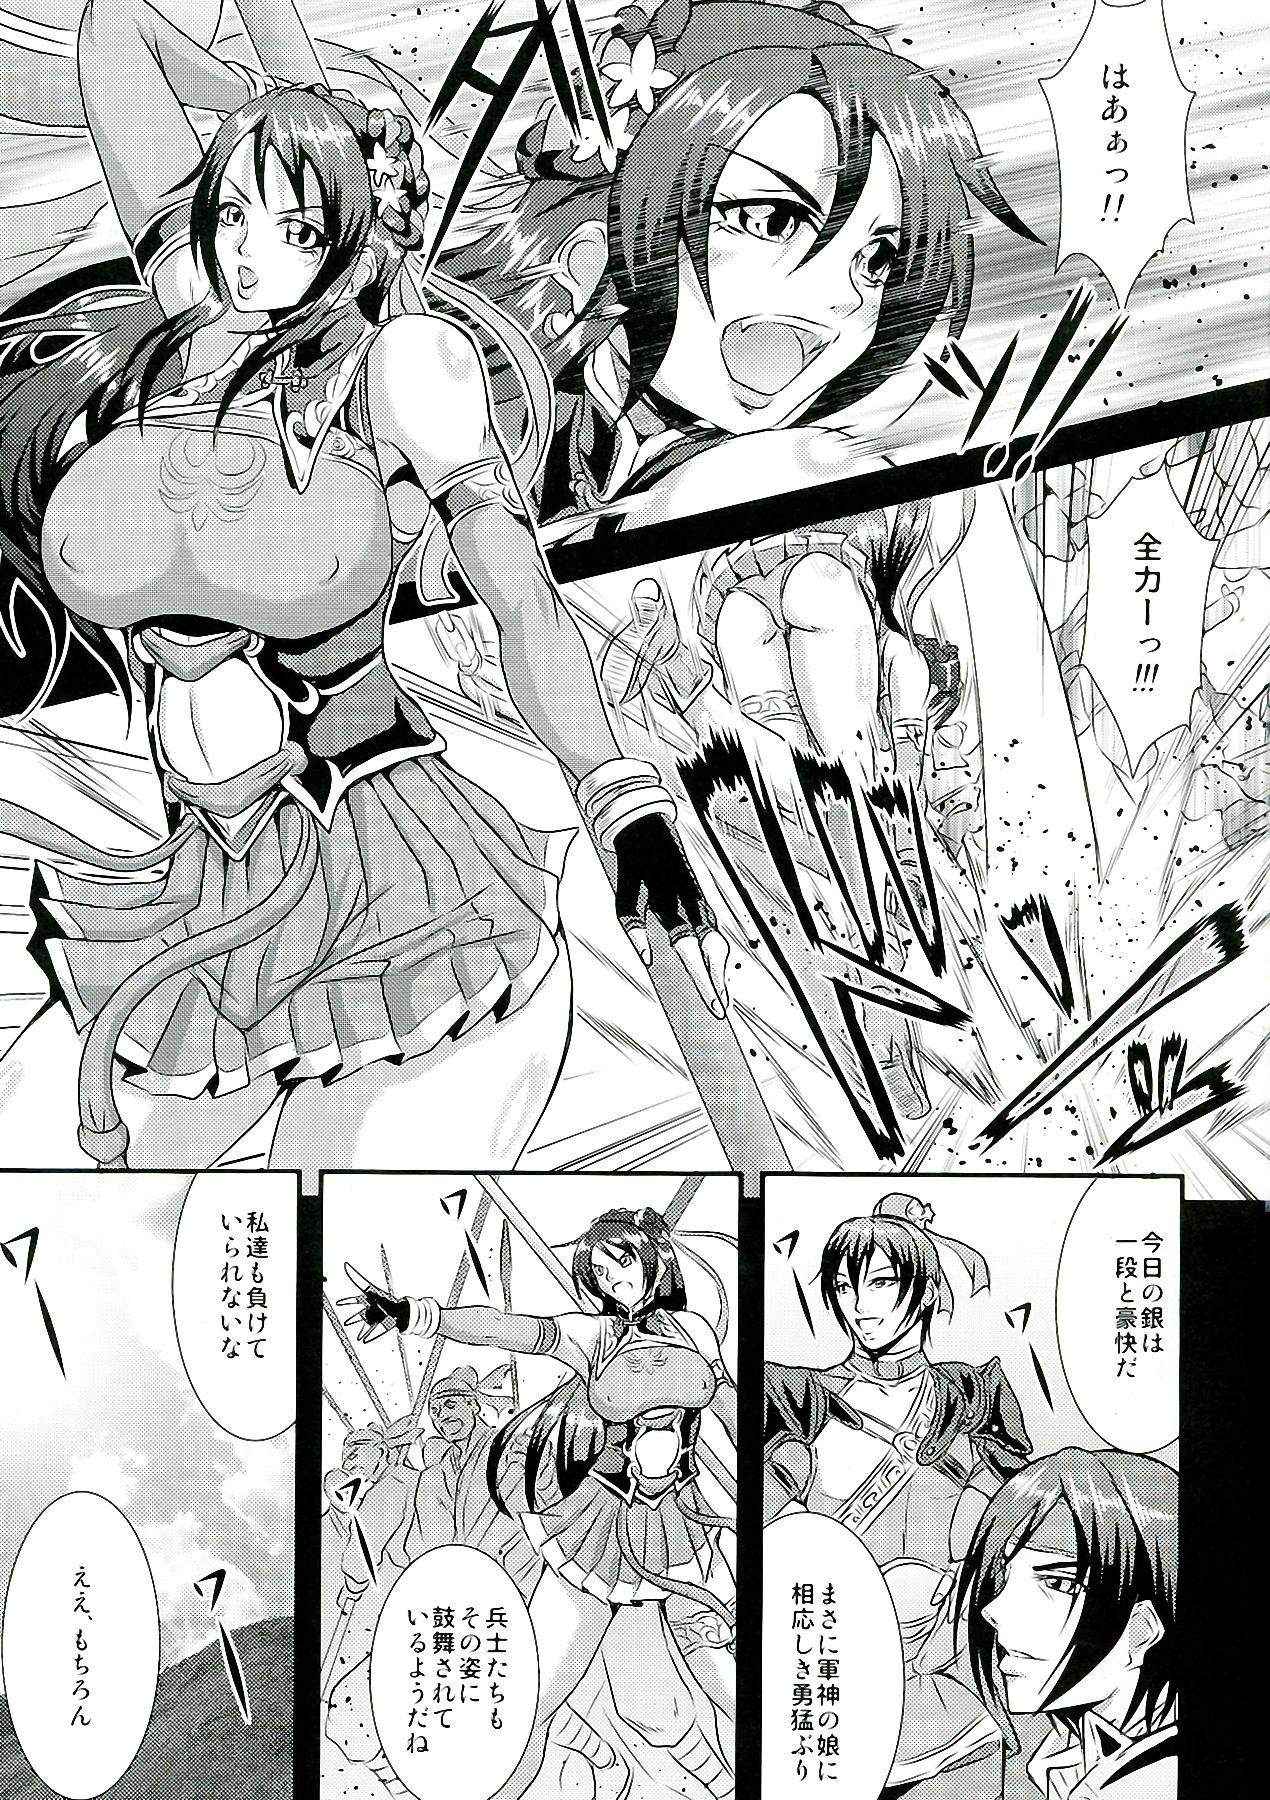 Gays Gisho . Seki Gin Byouden - Dynasty warriors Atm - Page 3